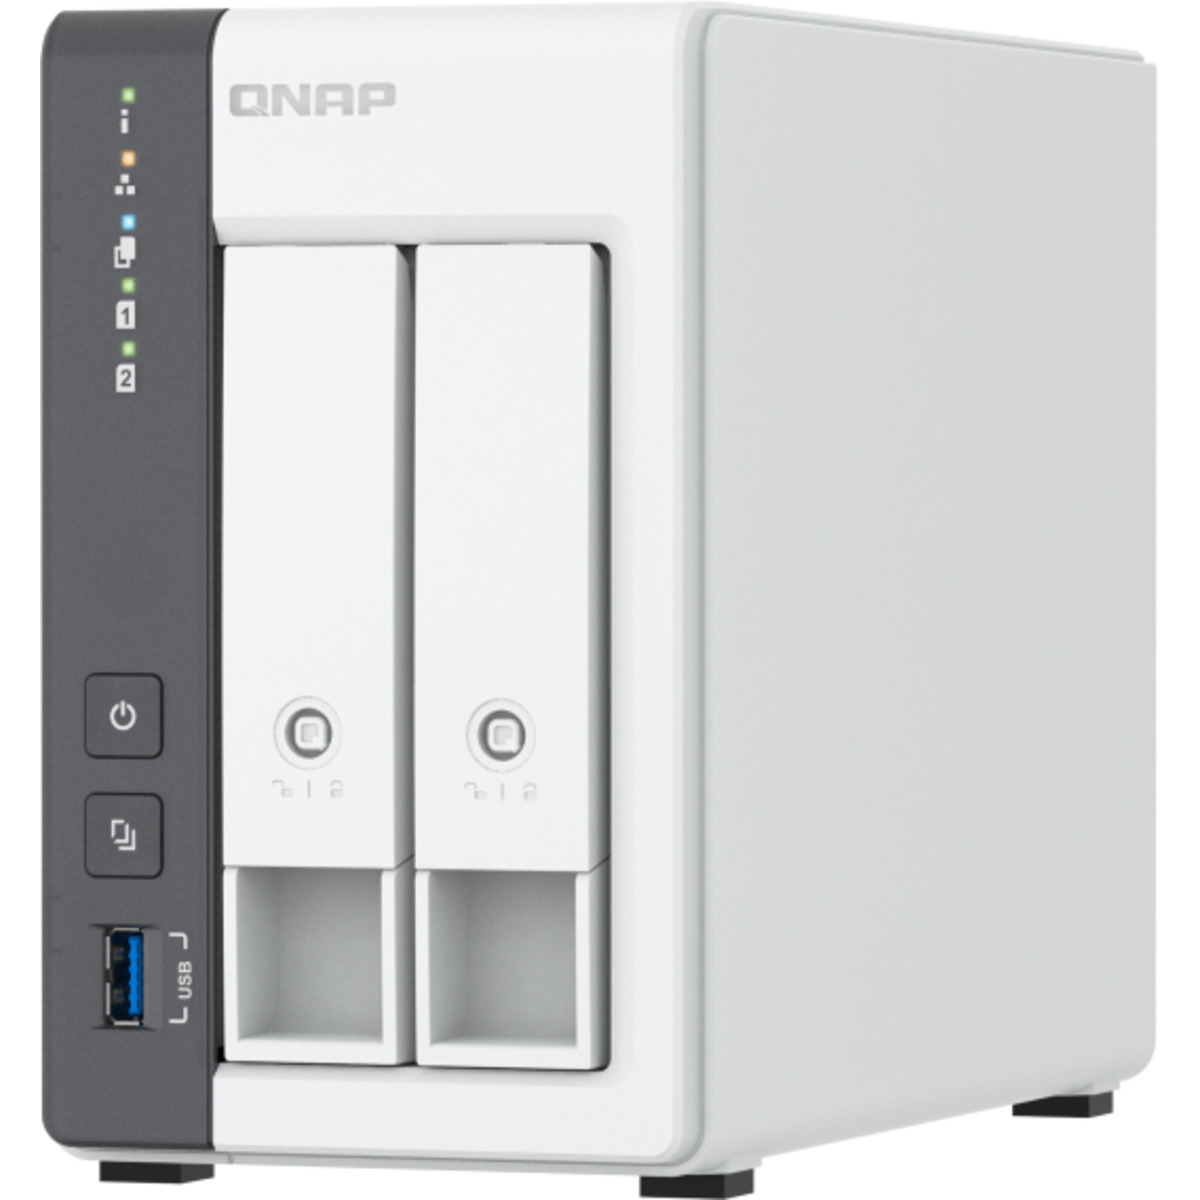 QNAP TS-216G 8tb 2-Bay Desktop Personal / Basic Home / Small Office NAS - Network Attached Storage Device 2x4tb Western Digital Blue WD40EZRZ 3.5 5400rpm SATA 6Gb/s HDD CONSUMER Class Drives Installed - Burn-In Tested TS-216G